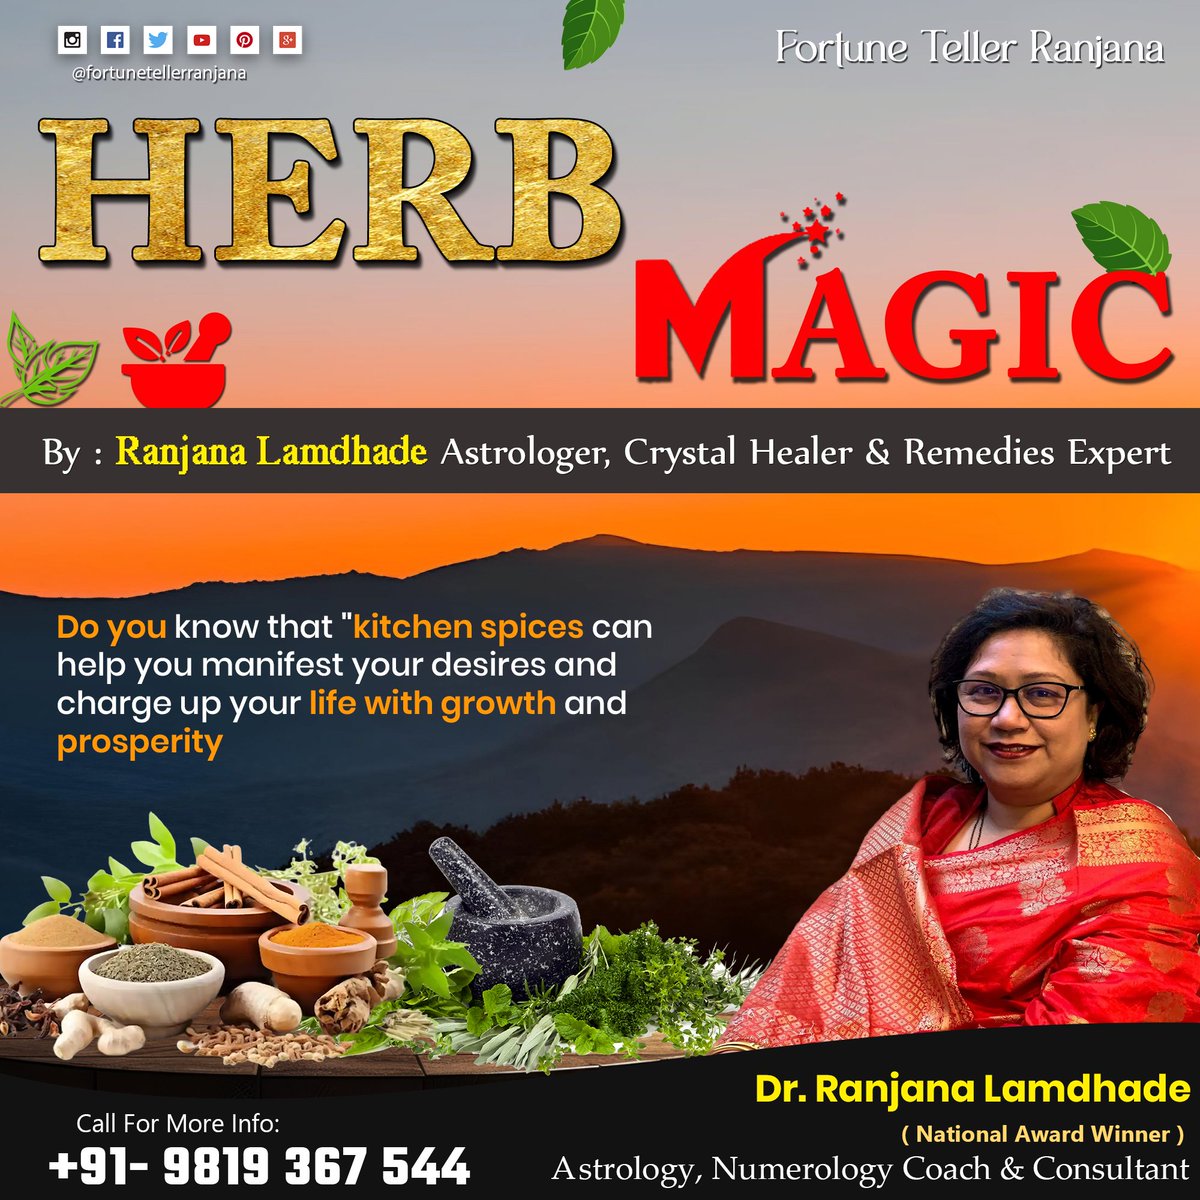 𝗛𝗘𝗥𝗕𝗠𝗔𝗚𝗜𝗖
Do you know that 'kitchen spices can help you manifest your desires and charge up your life with growth and prosperity
.
.
.
#fortunetellerranjana #drranjnalamdhade #herbmagic #herbalremedies #herb #herbkitchen #growth #numerology #astrology #tarot #horoscope